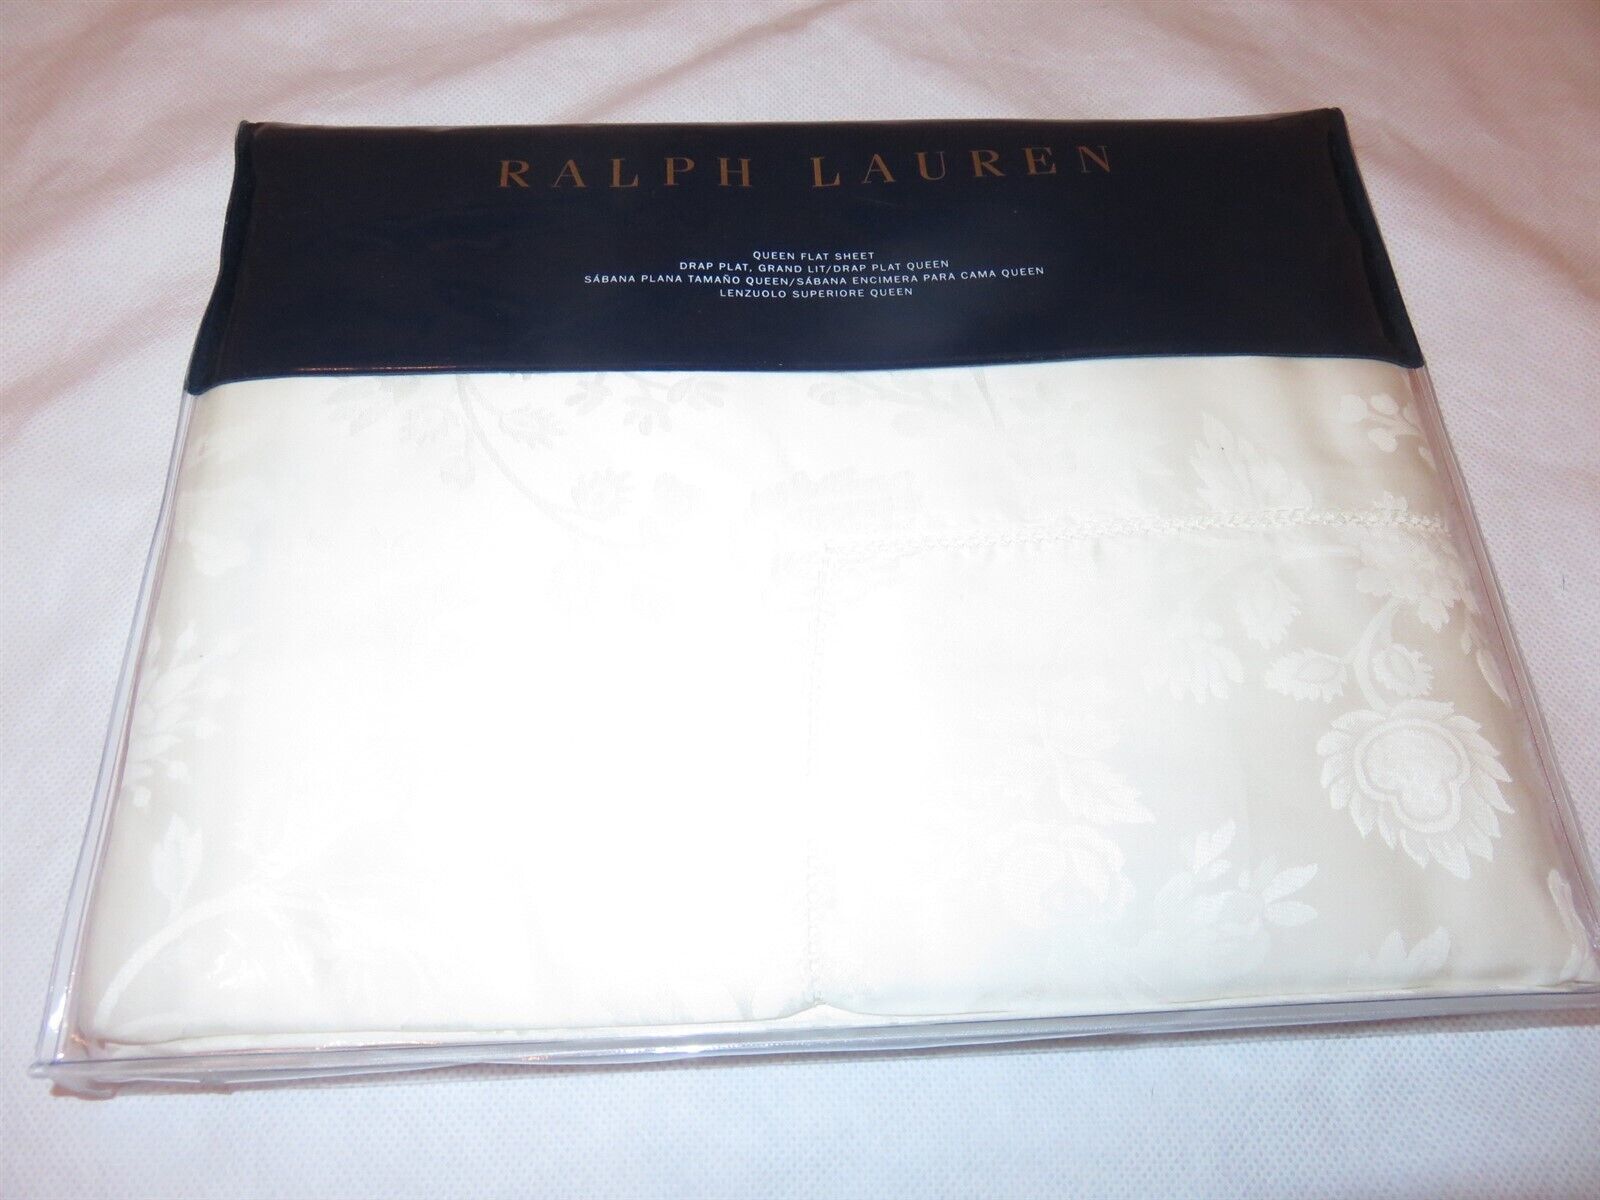 Primary image for Ralph Lauren Ashmont Jacquard Sateen Queen Flat Sheet 600TC $300 Cream Italy